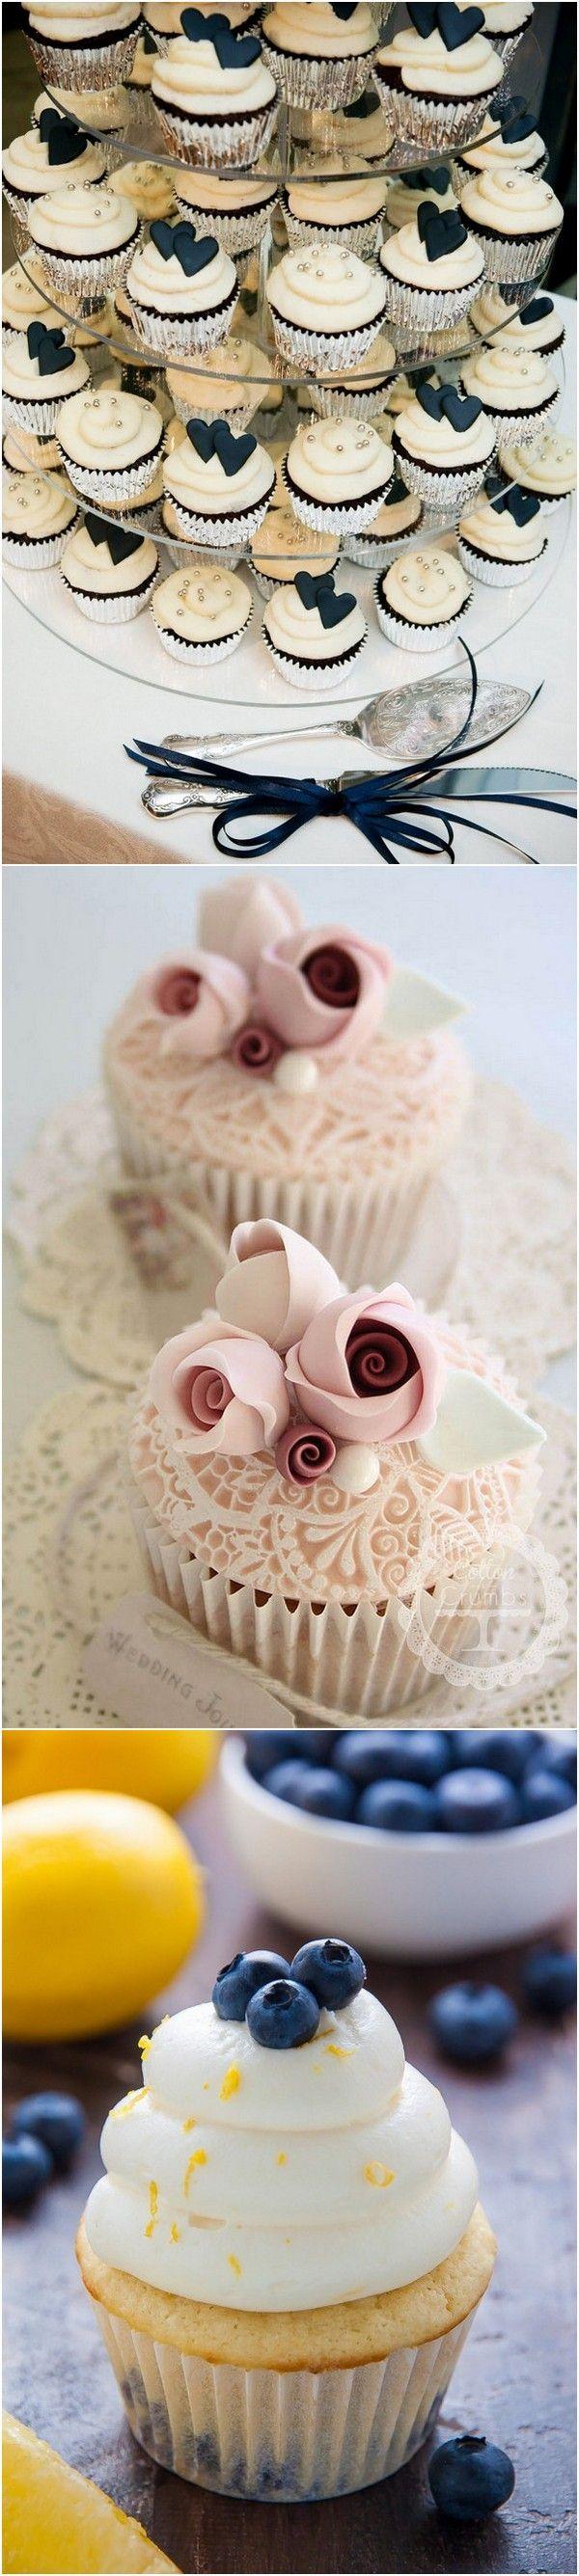 Wedding - 24 Creative Wedding Cupcake Ideas For Your Big Day - Page 2 Of 3